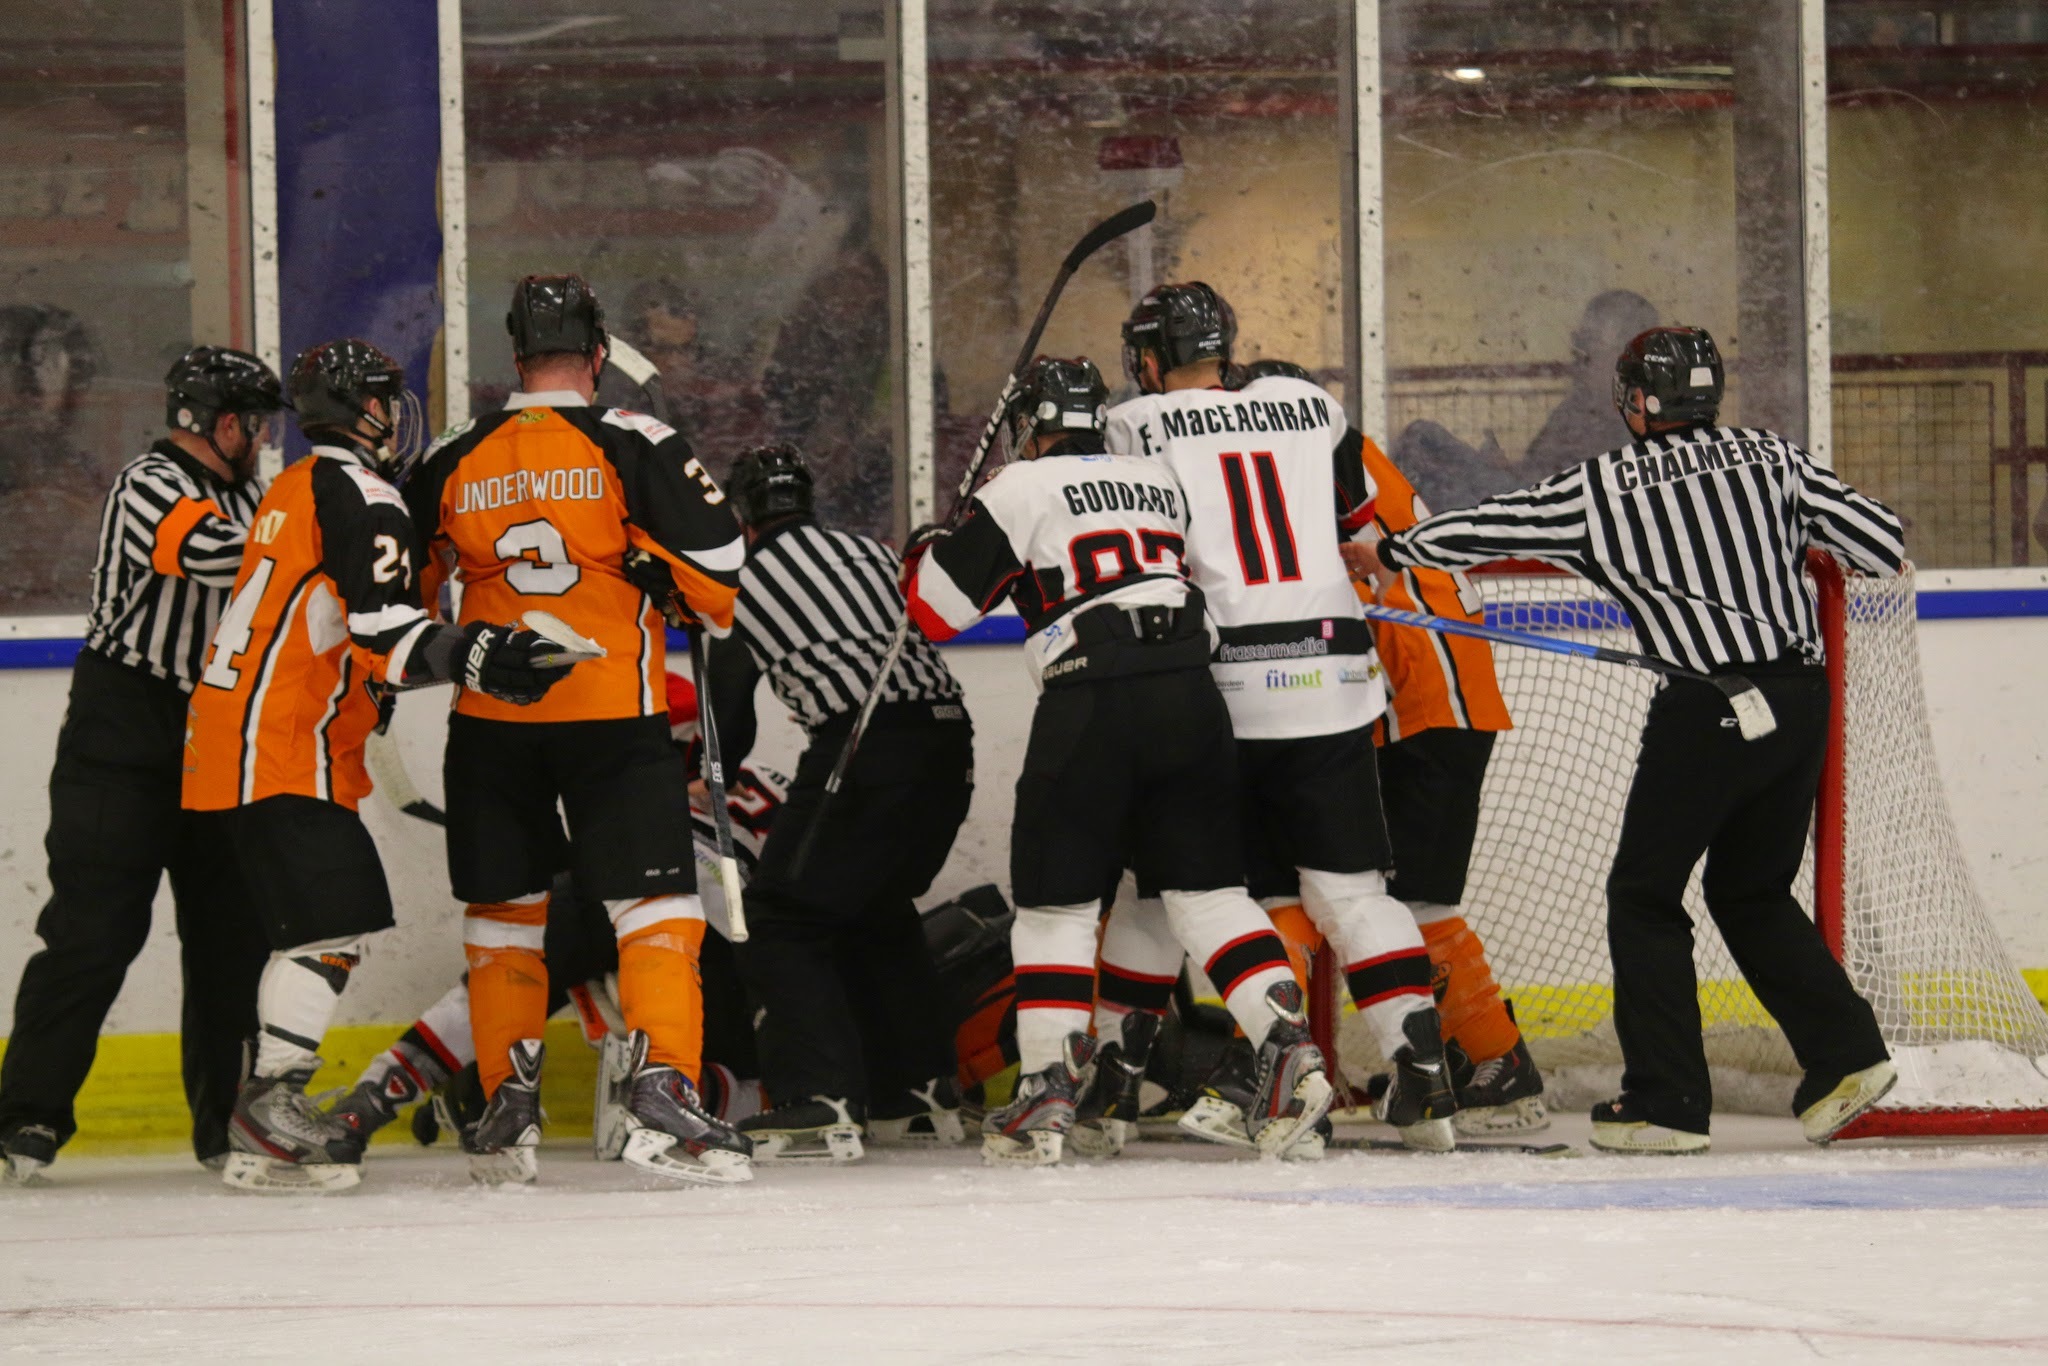 Aberdeen Lynx saw off North Ayrshire Wild 8-1 to set up a semi-final with Dundee Tigers